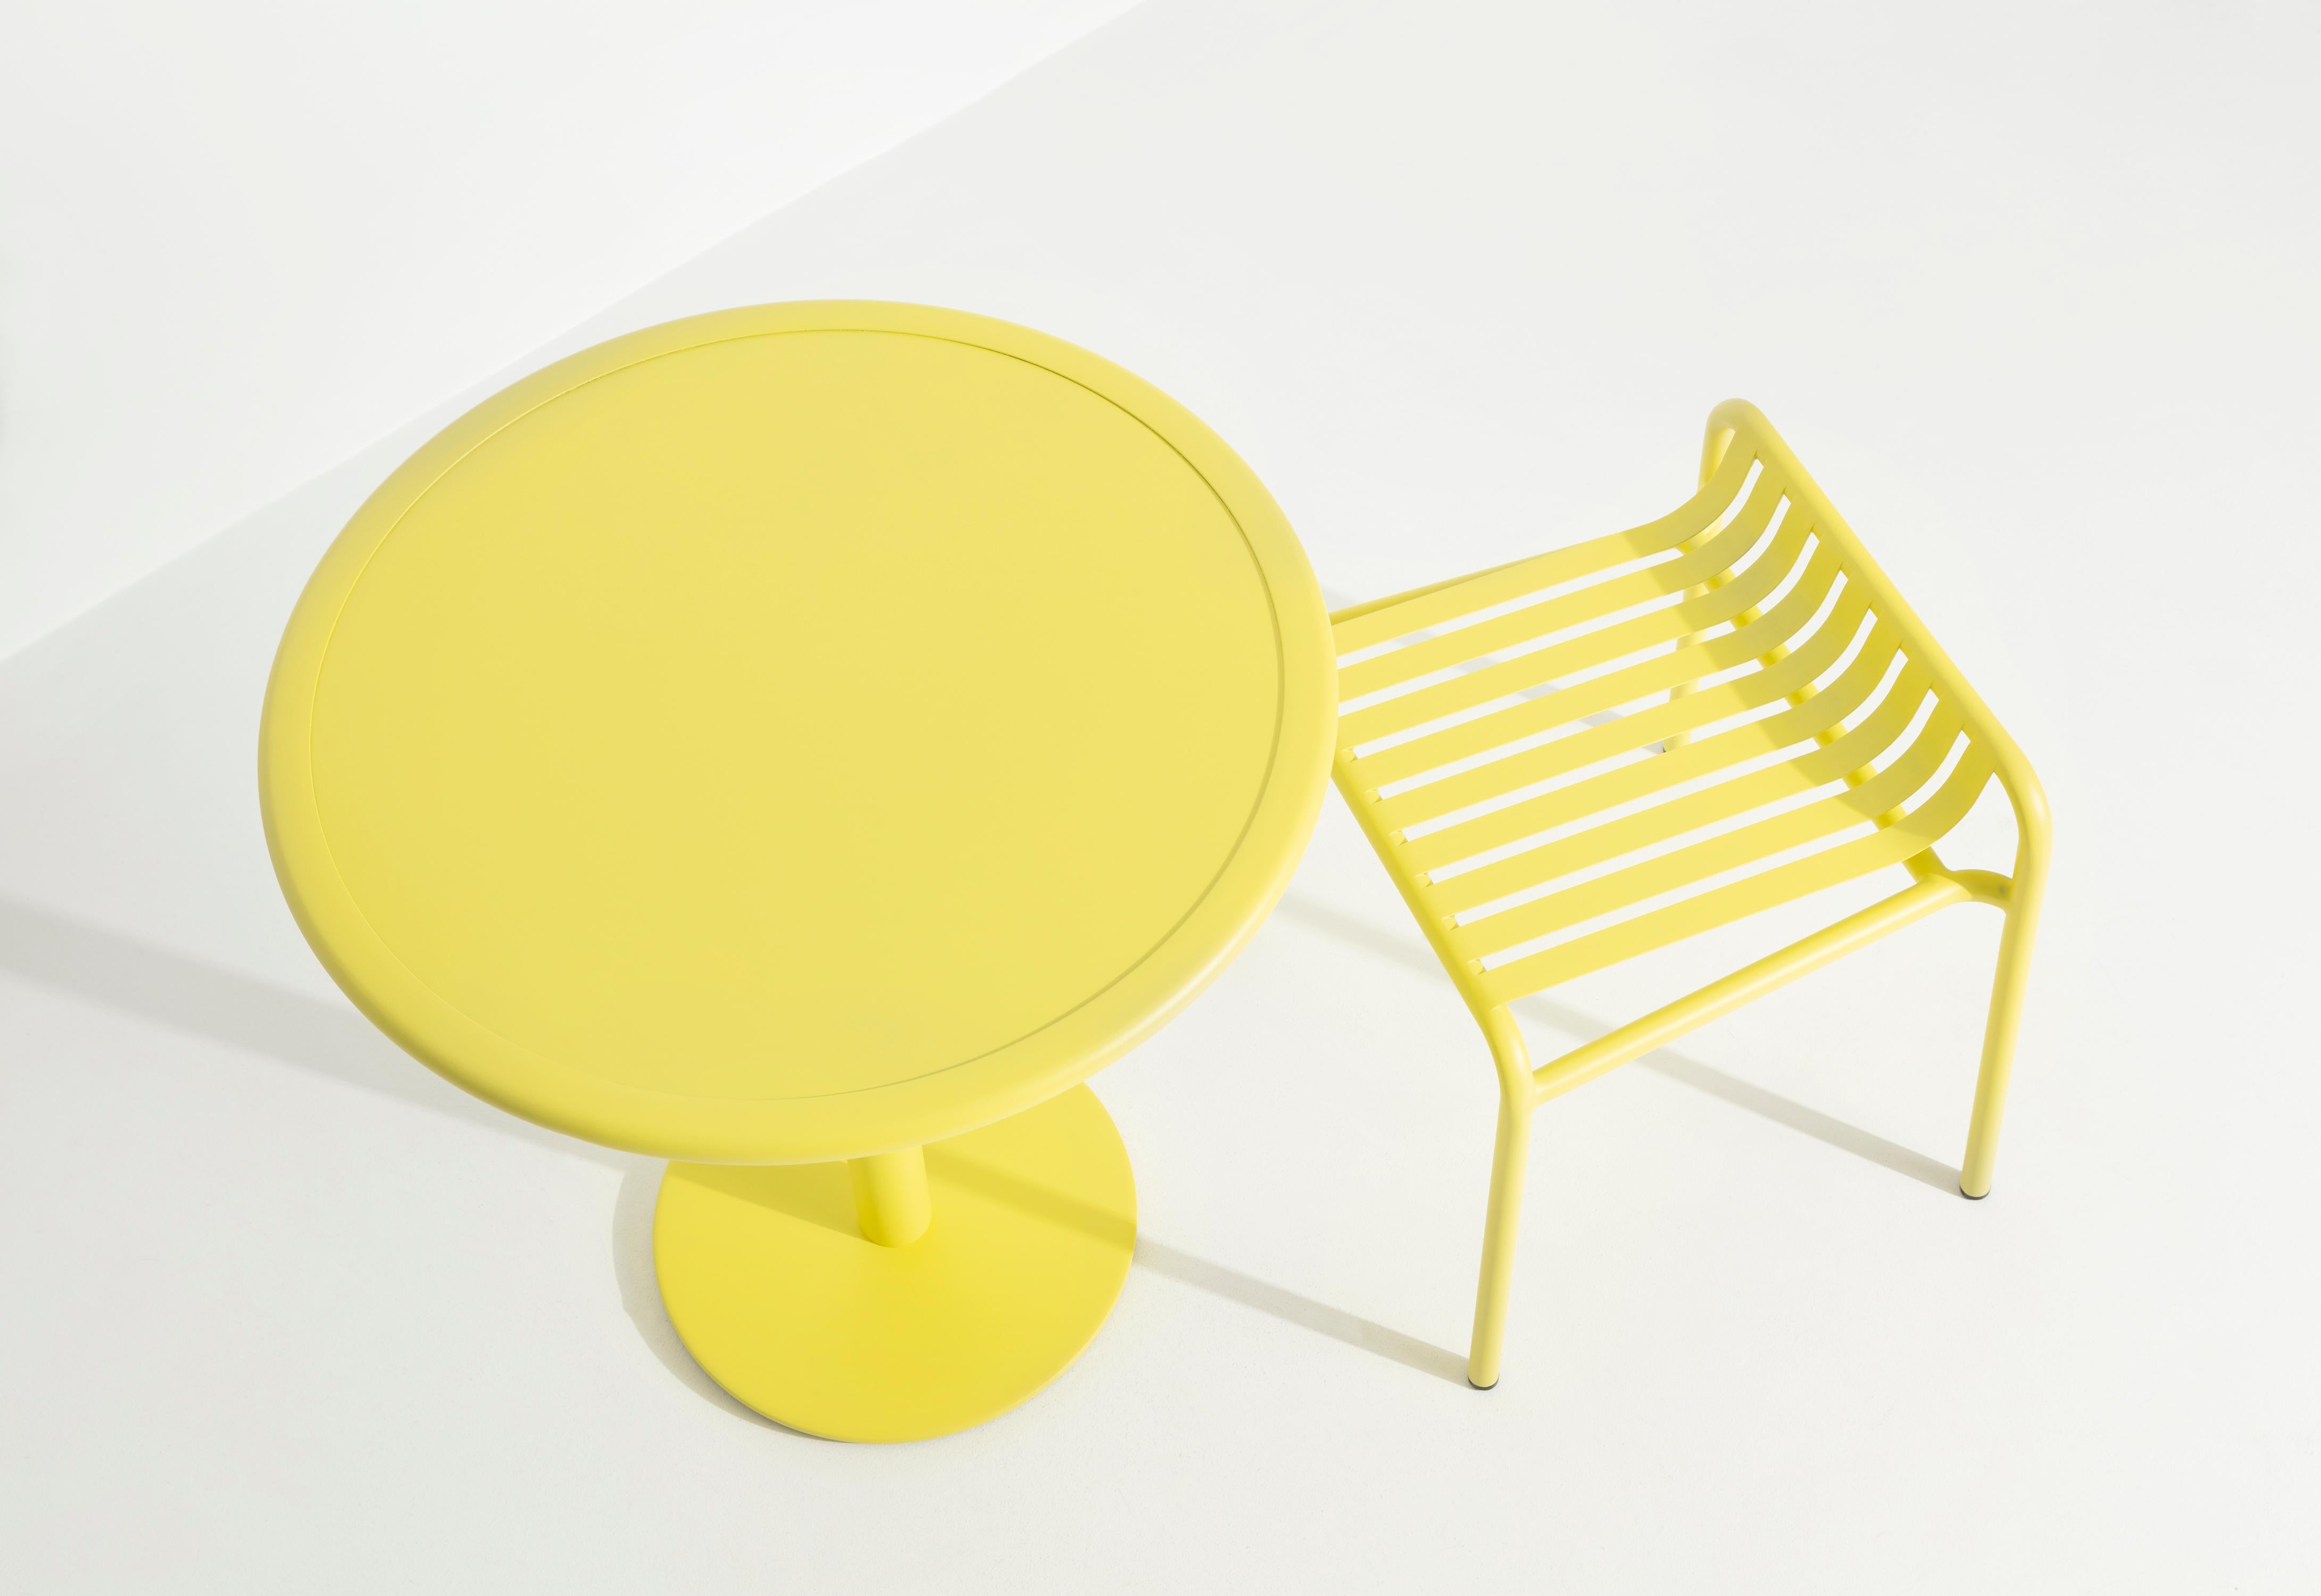 Contemporary Petite Friture Week-End Round High Table in Yellow Aluminium, 2017 For Sale